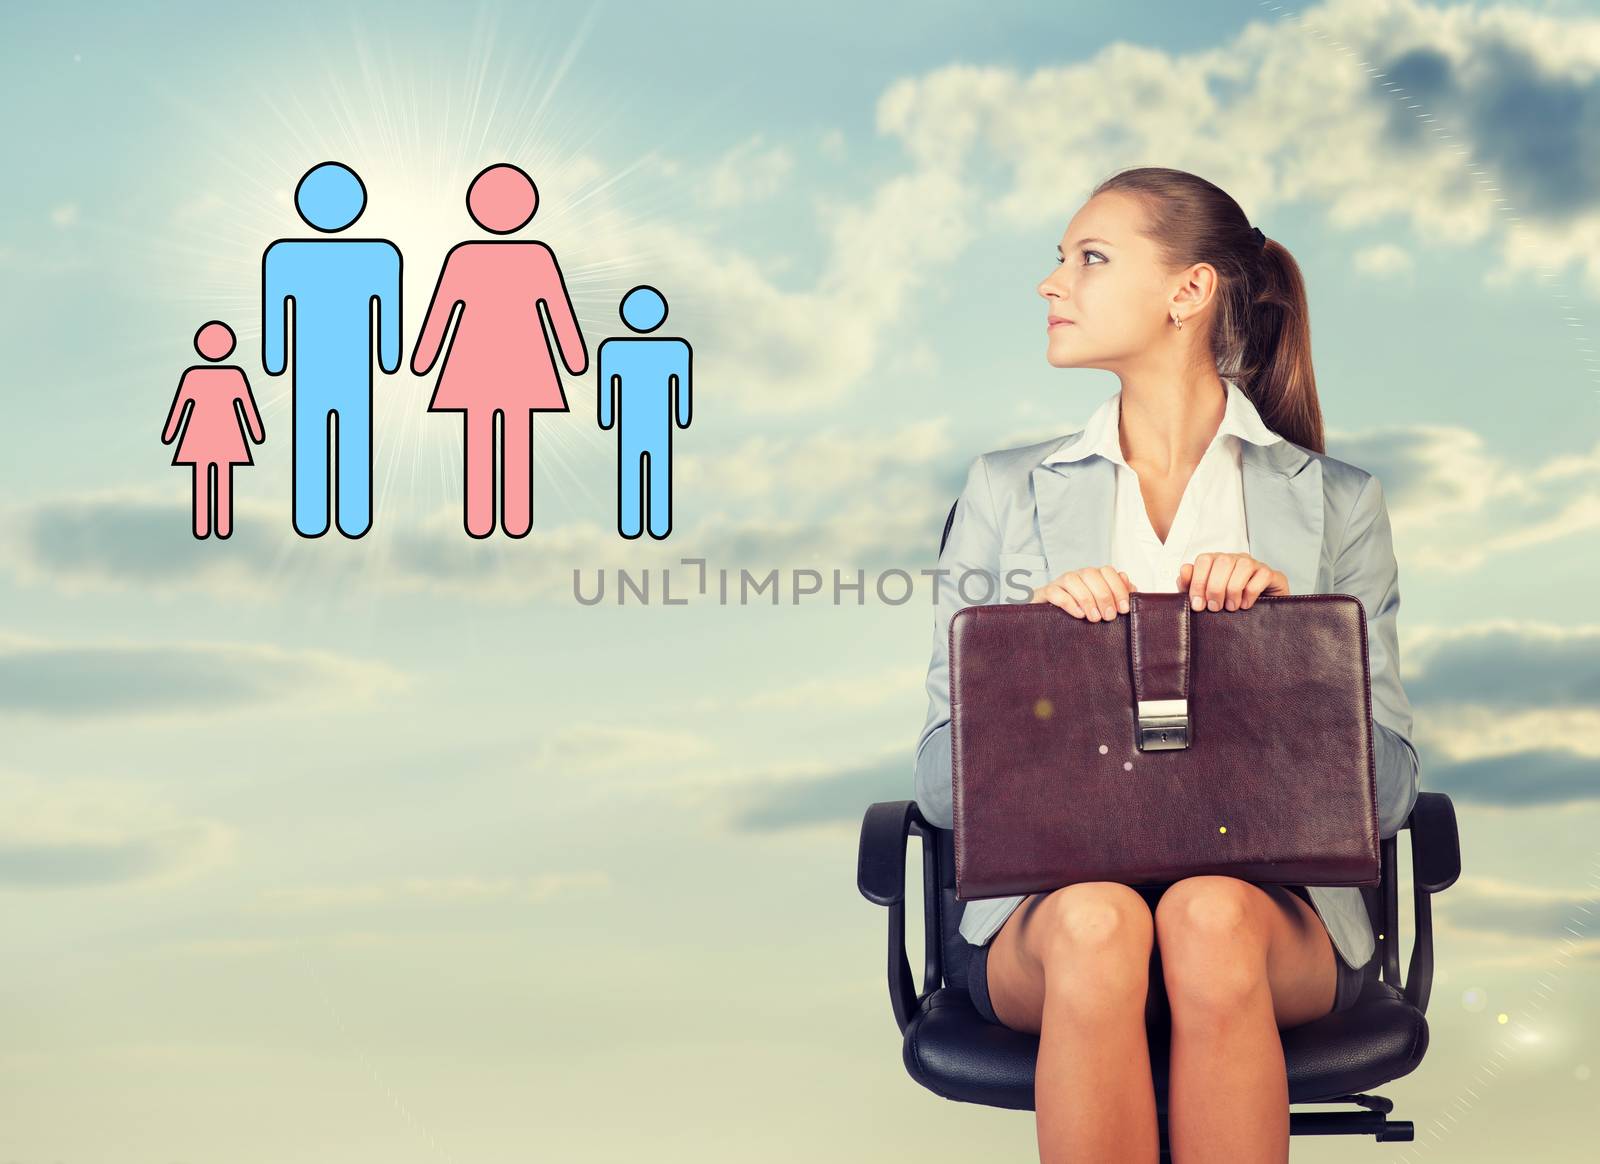 Business woman in skirt, blouse and jacket, sitting on chair and holding briefcase imagines family. Against background of sky and clouds